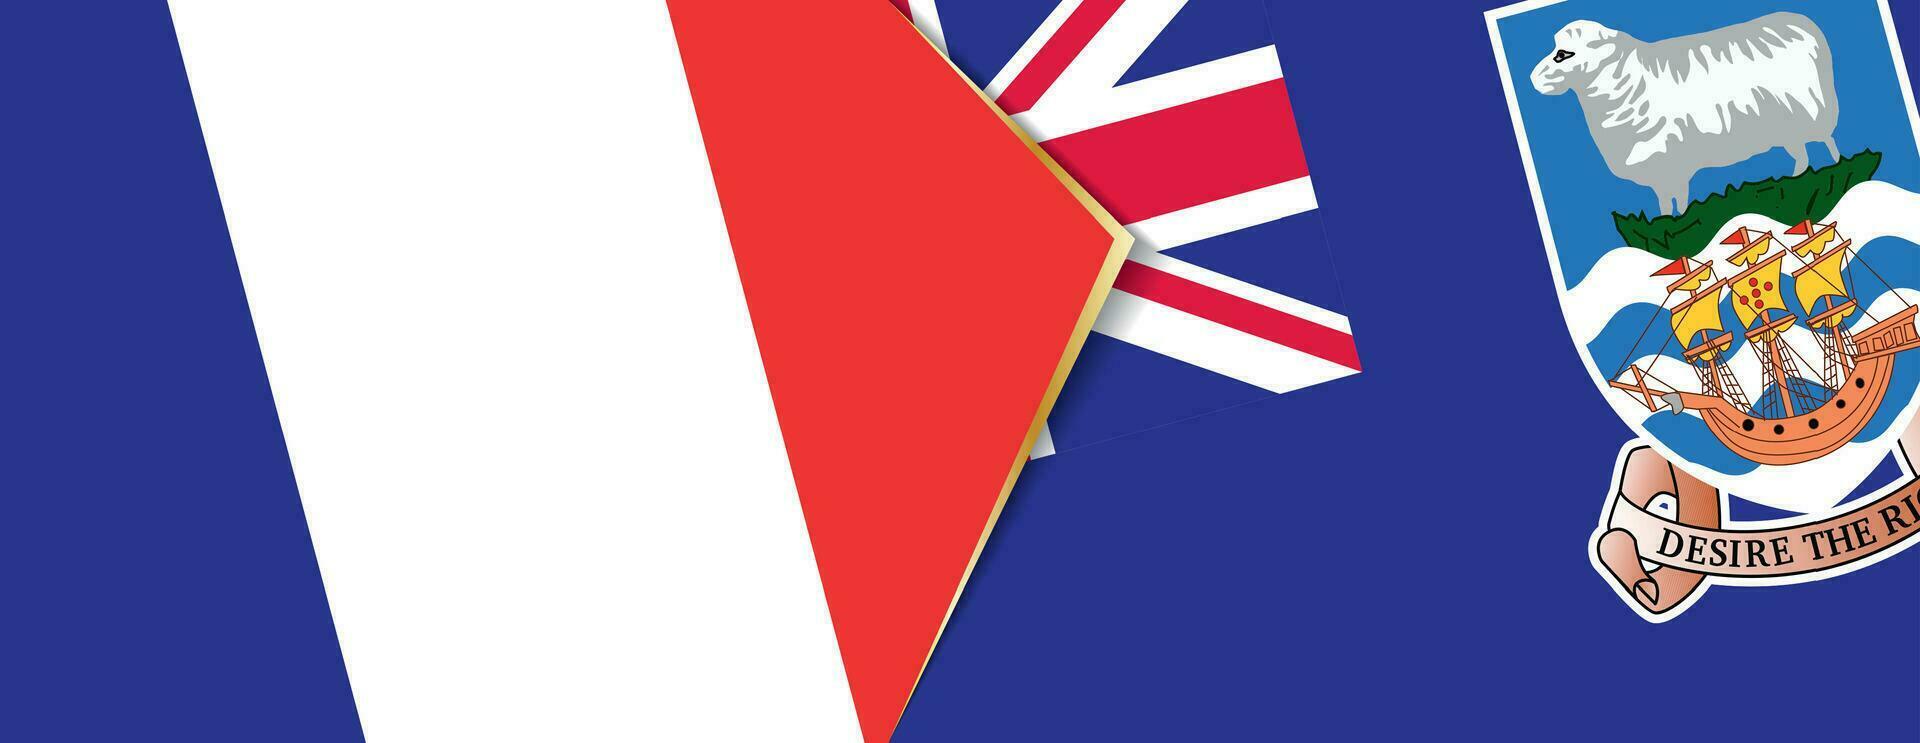 France and Falkland Islands flags, two vector flags.